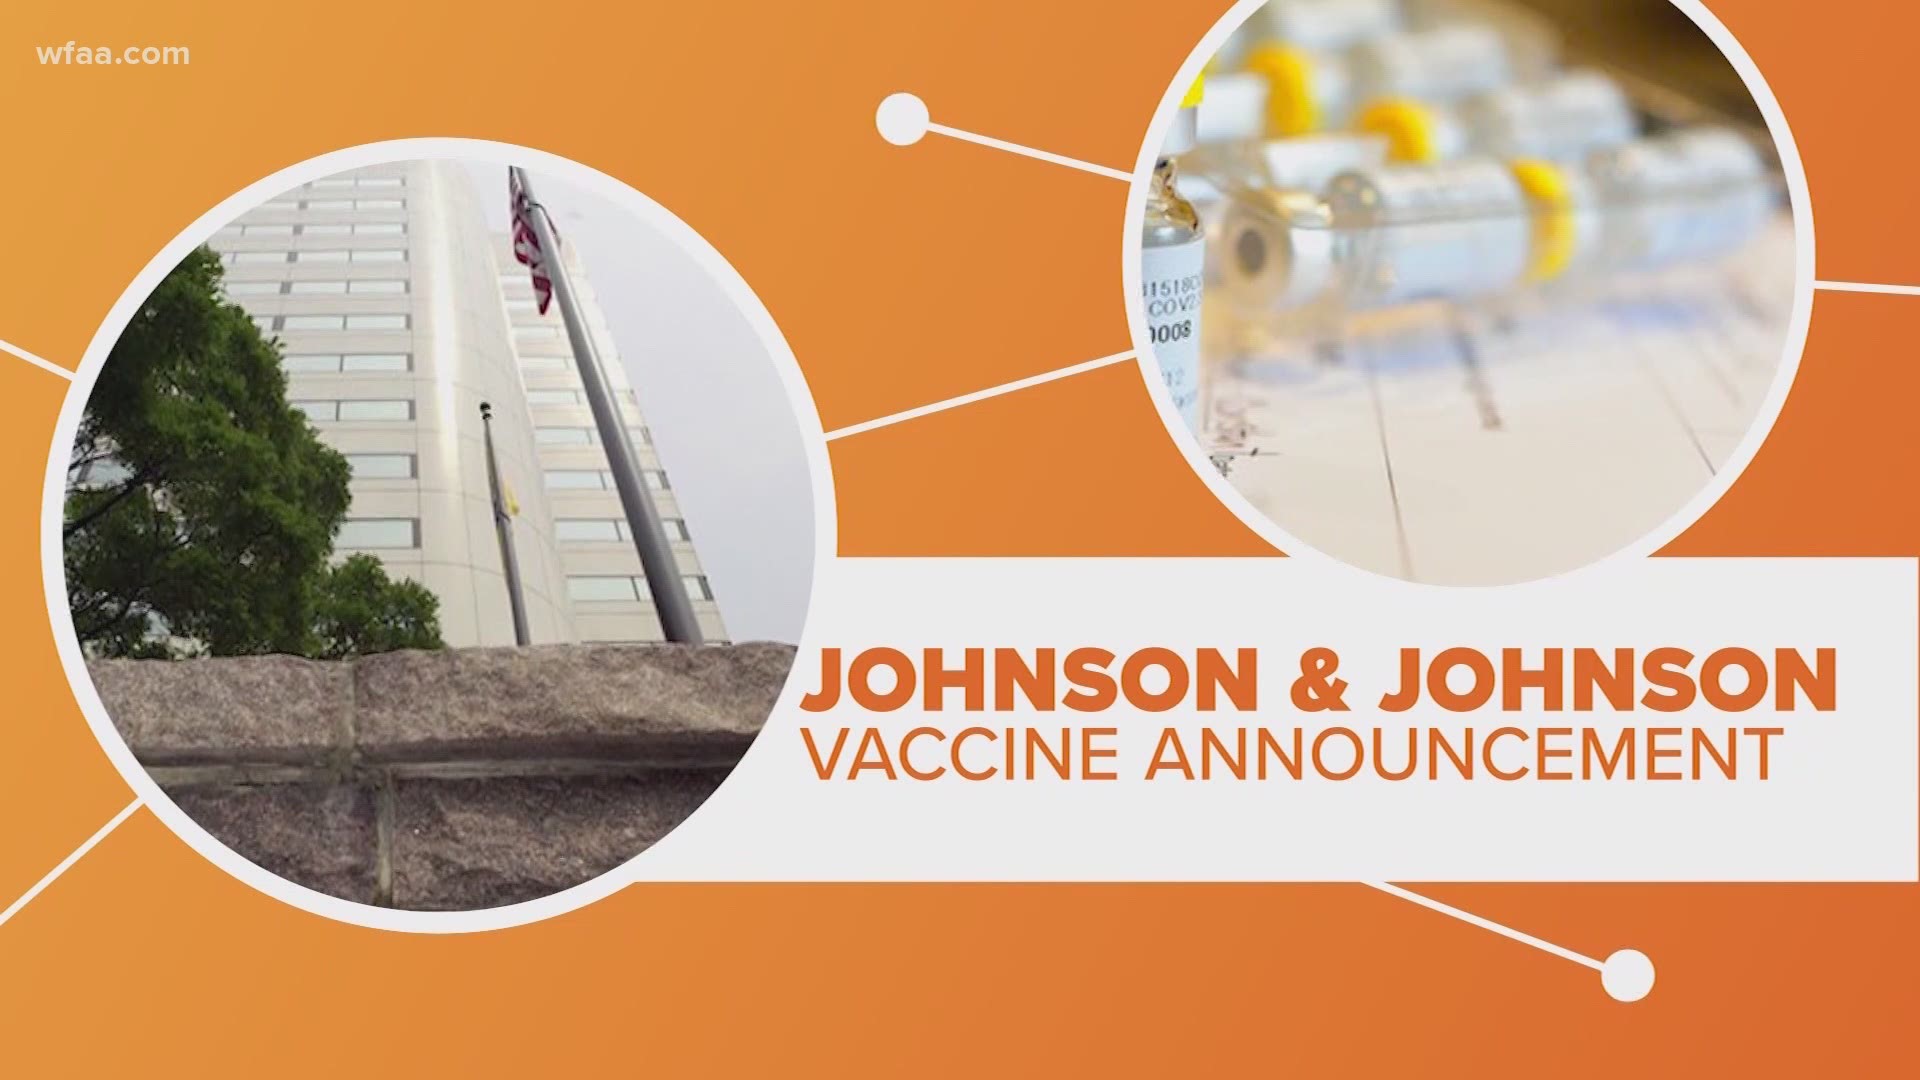 Johnson & Johnson revealed it has started the final stage of clinical trials for its COVID-19 vaccine.